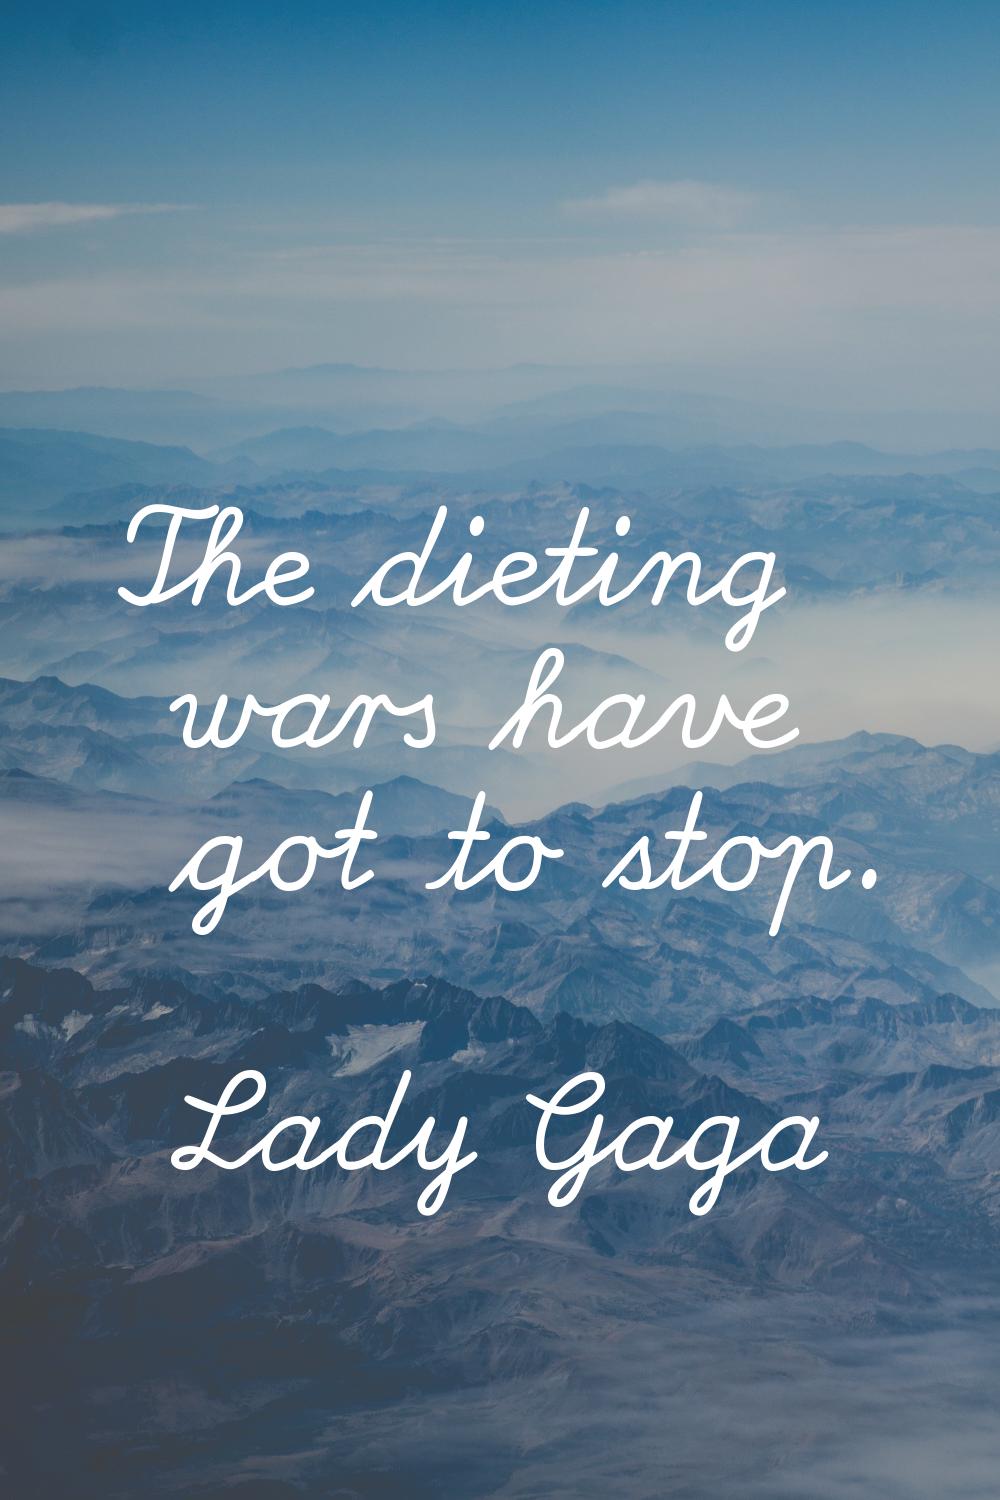 The dieting wars have got to stop.